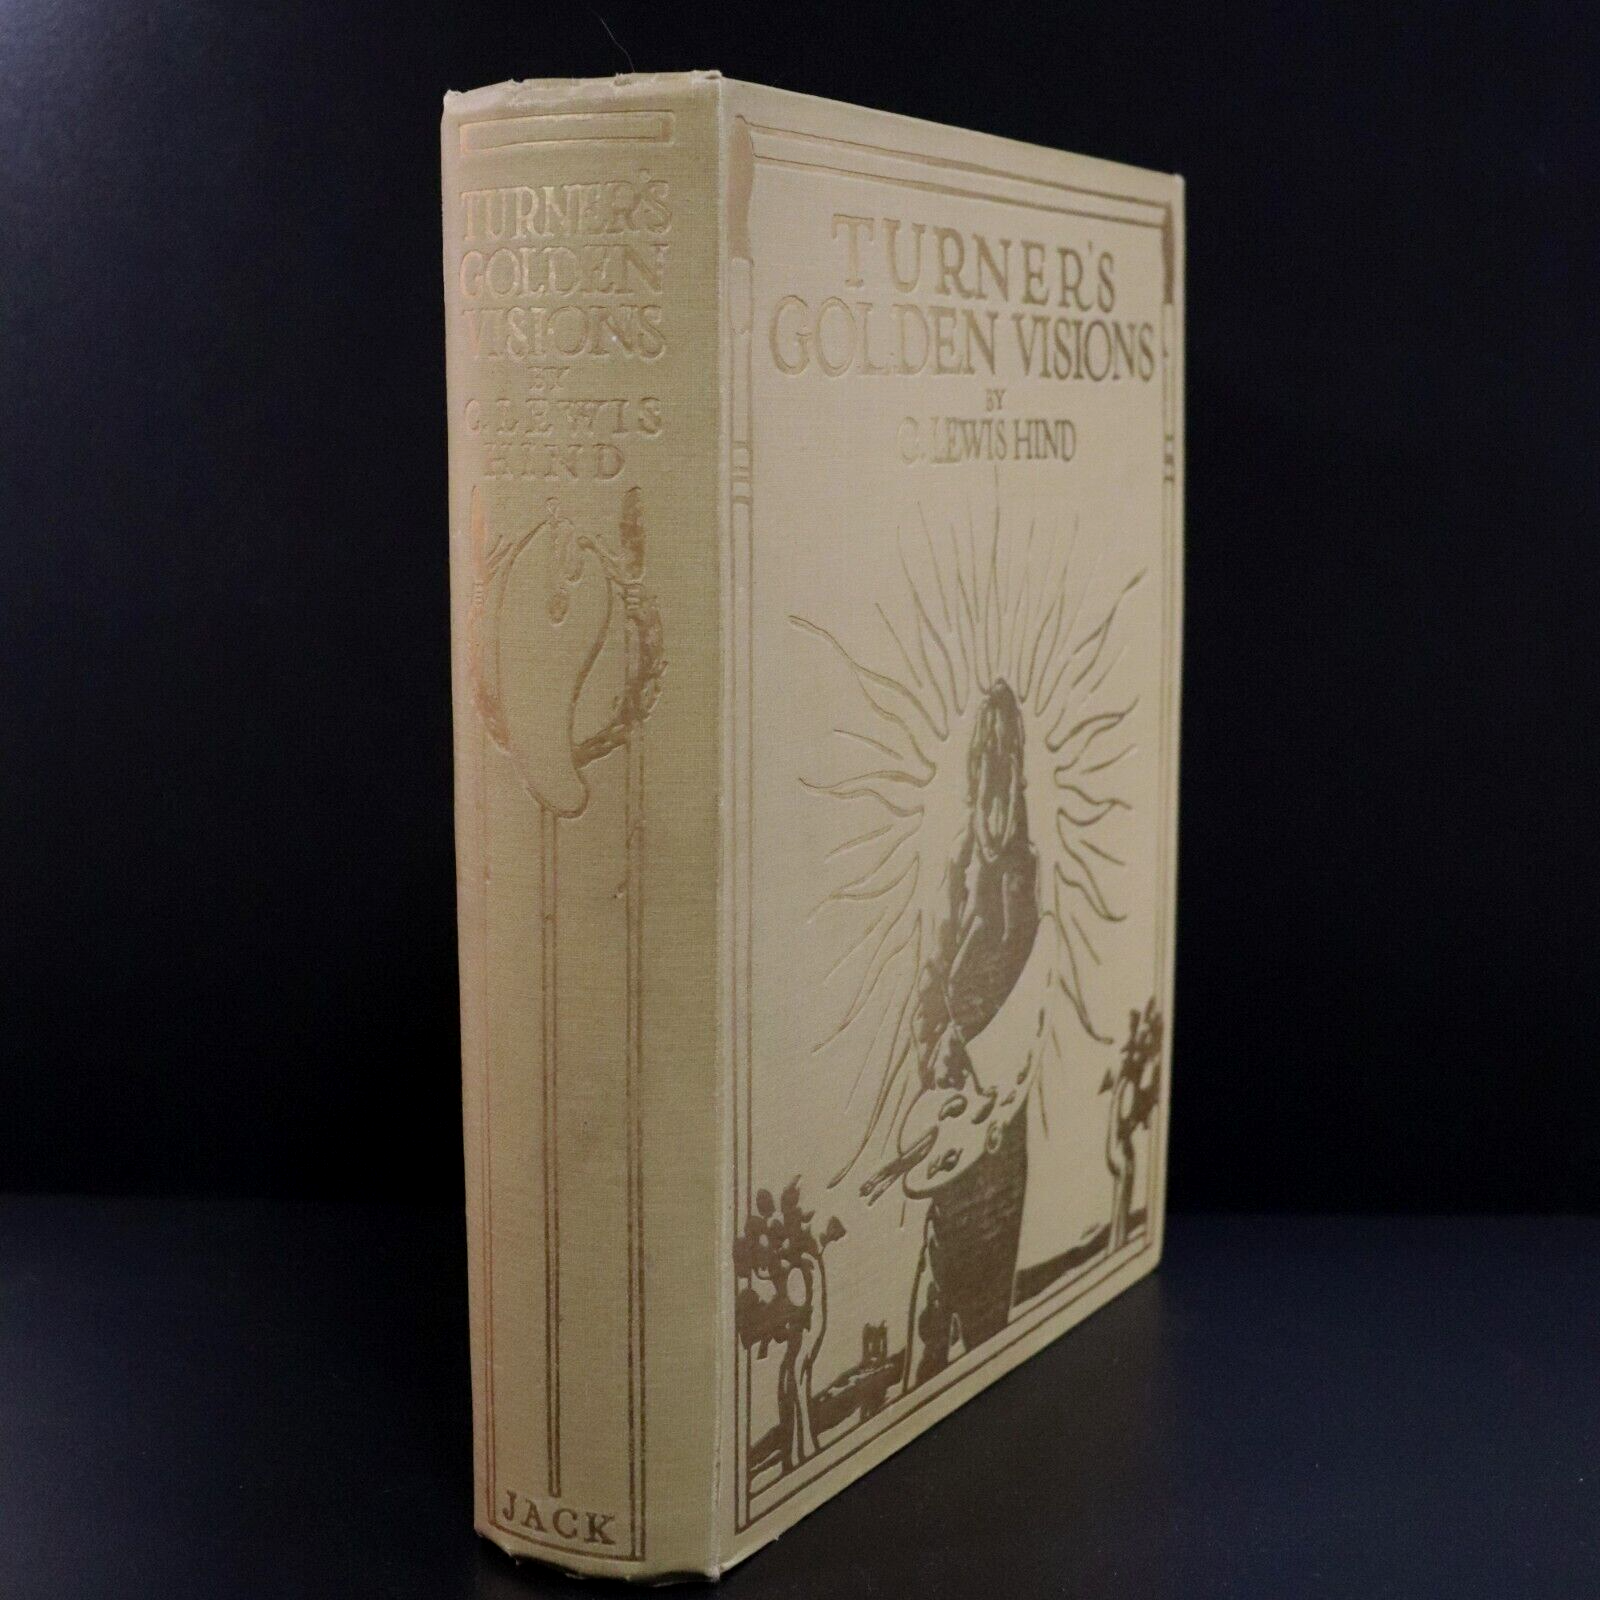 1925 Turner's Golden Visions by C. Lewis Hing Illustrated Antique Art Book